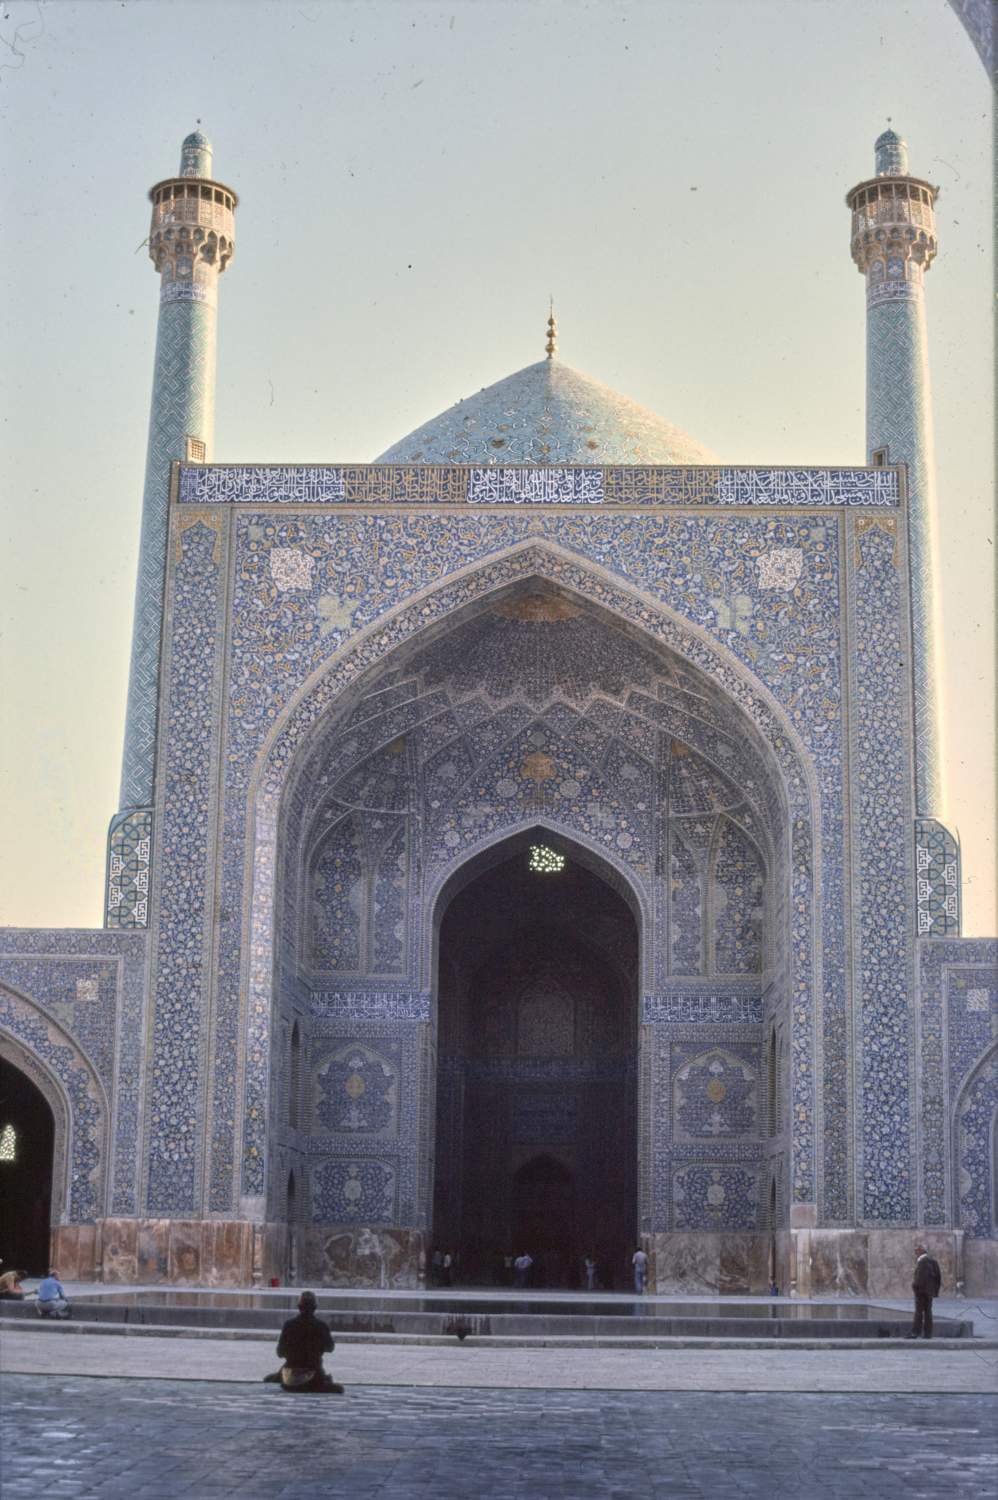 View of qibla iwan from courtyard.